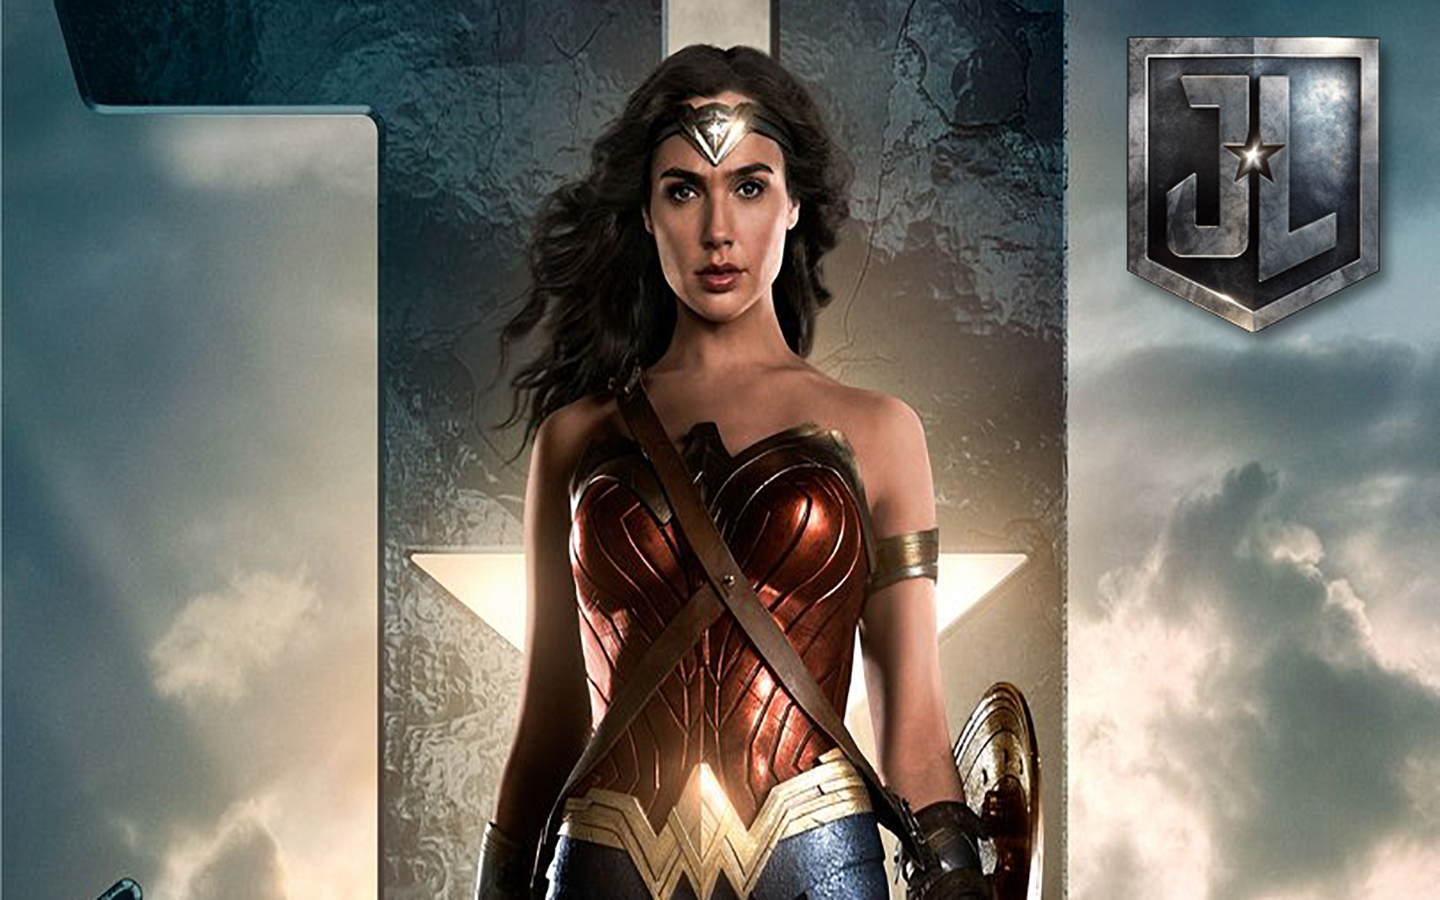 Gal Gadot Talks Wonder Woman’s Growth in ‘Justice League’ And Her Relationship With Batman